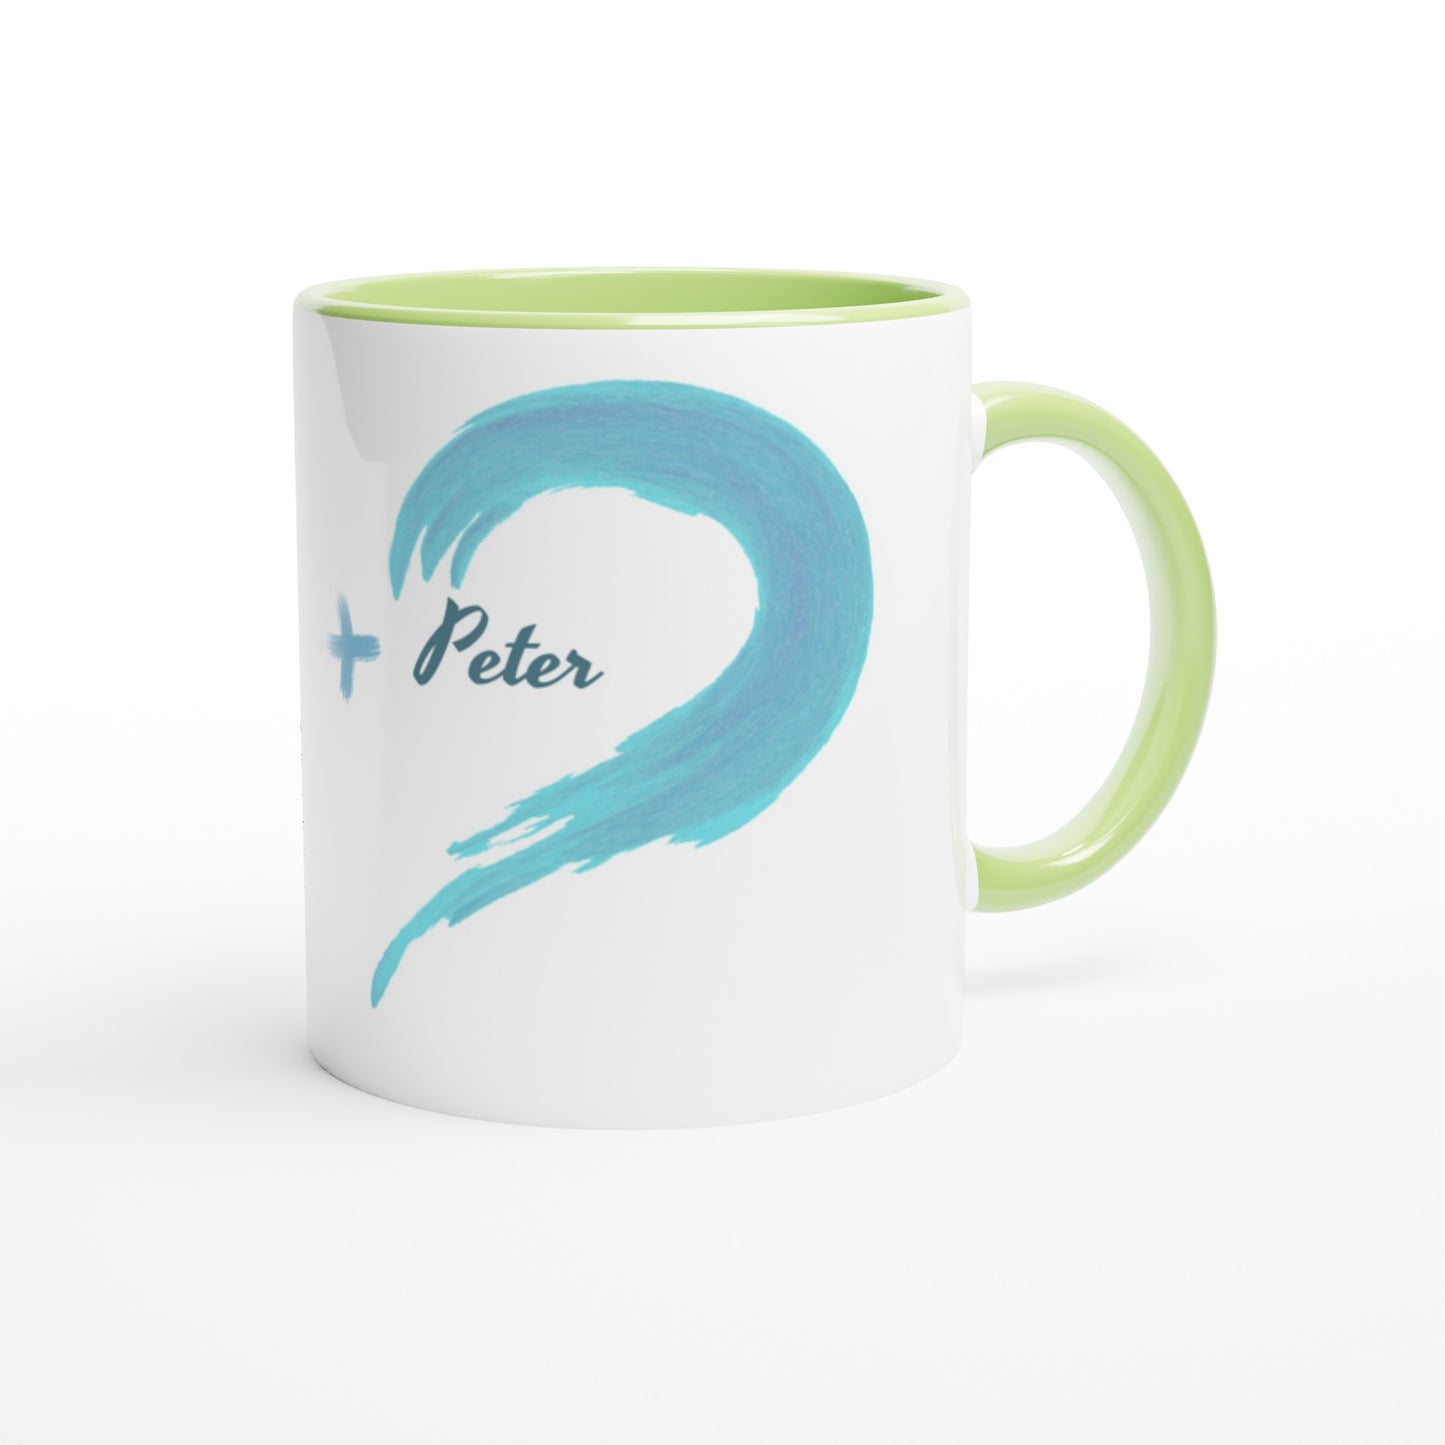 Personalizable Ceramic Mug with Color Inside "Peter"